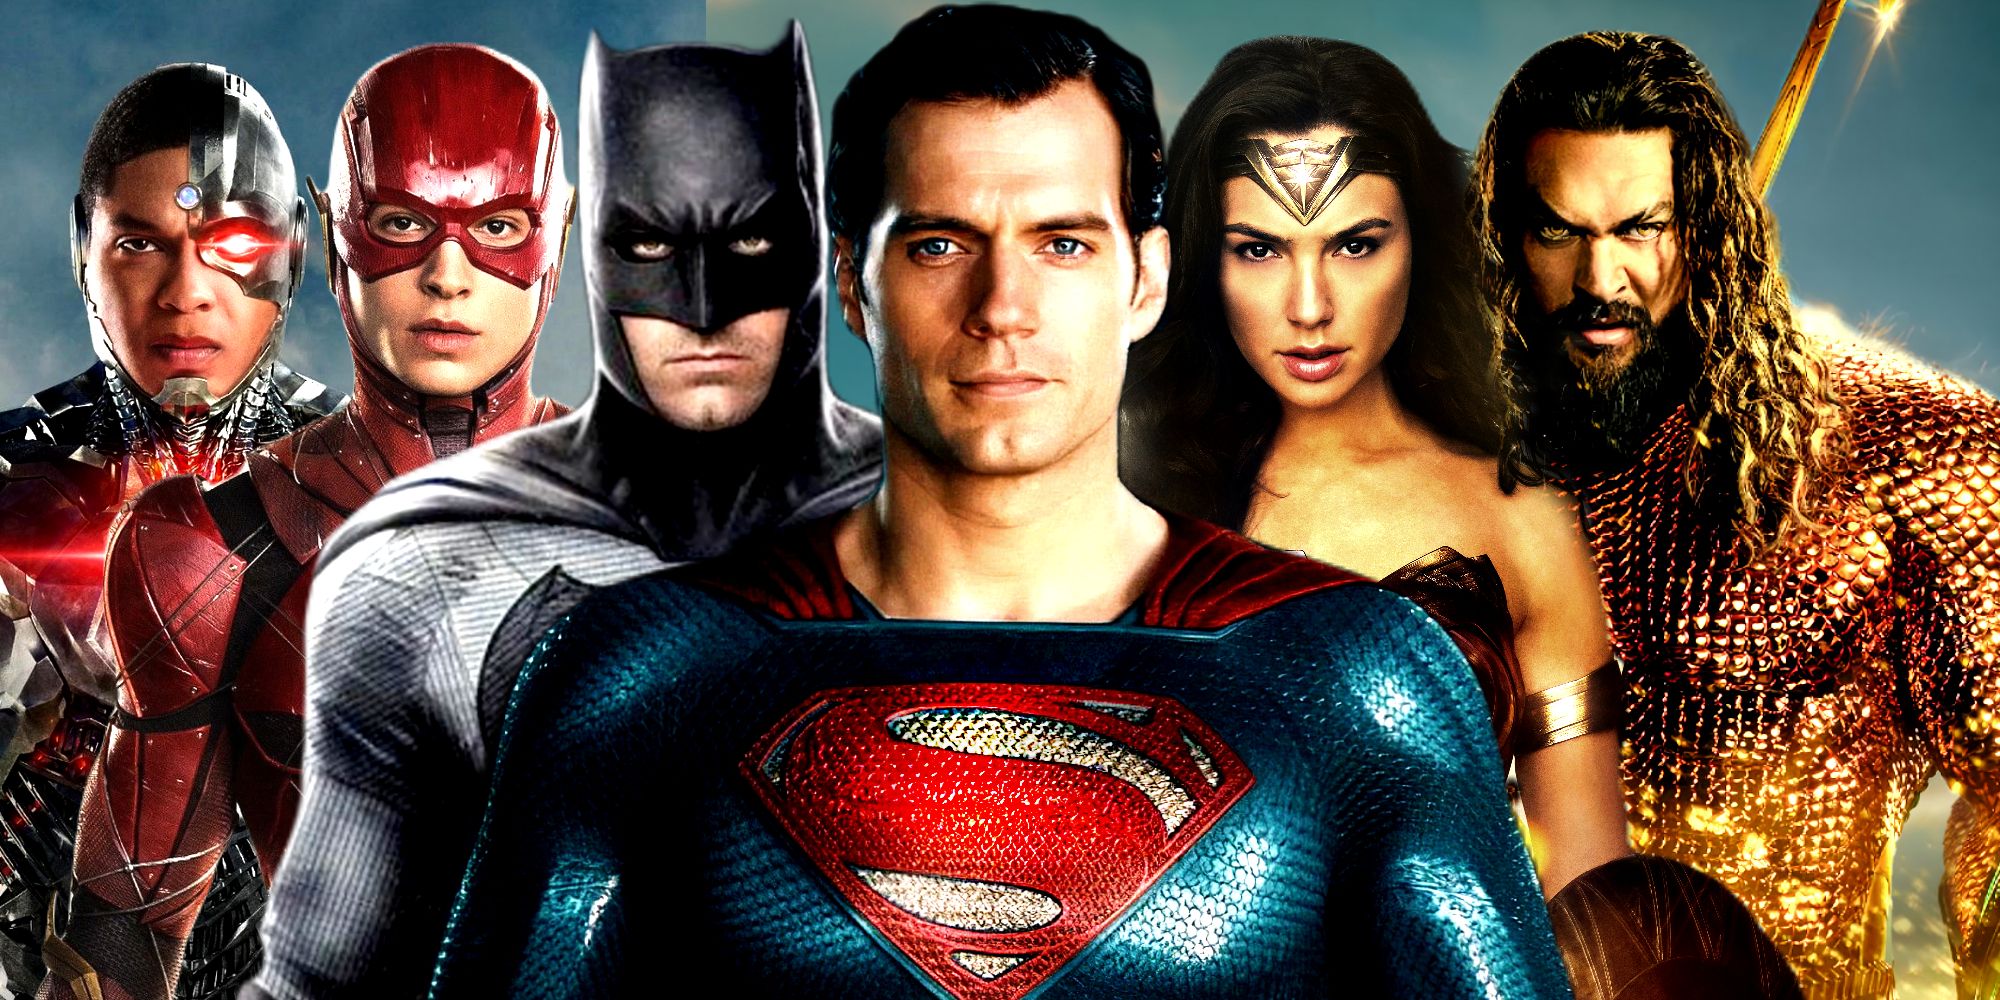 Predicting What Happened To All 6 Justice League Members After The